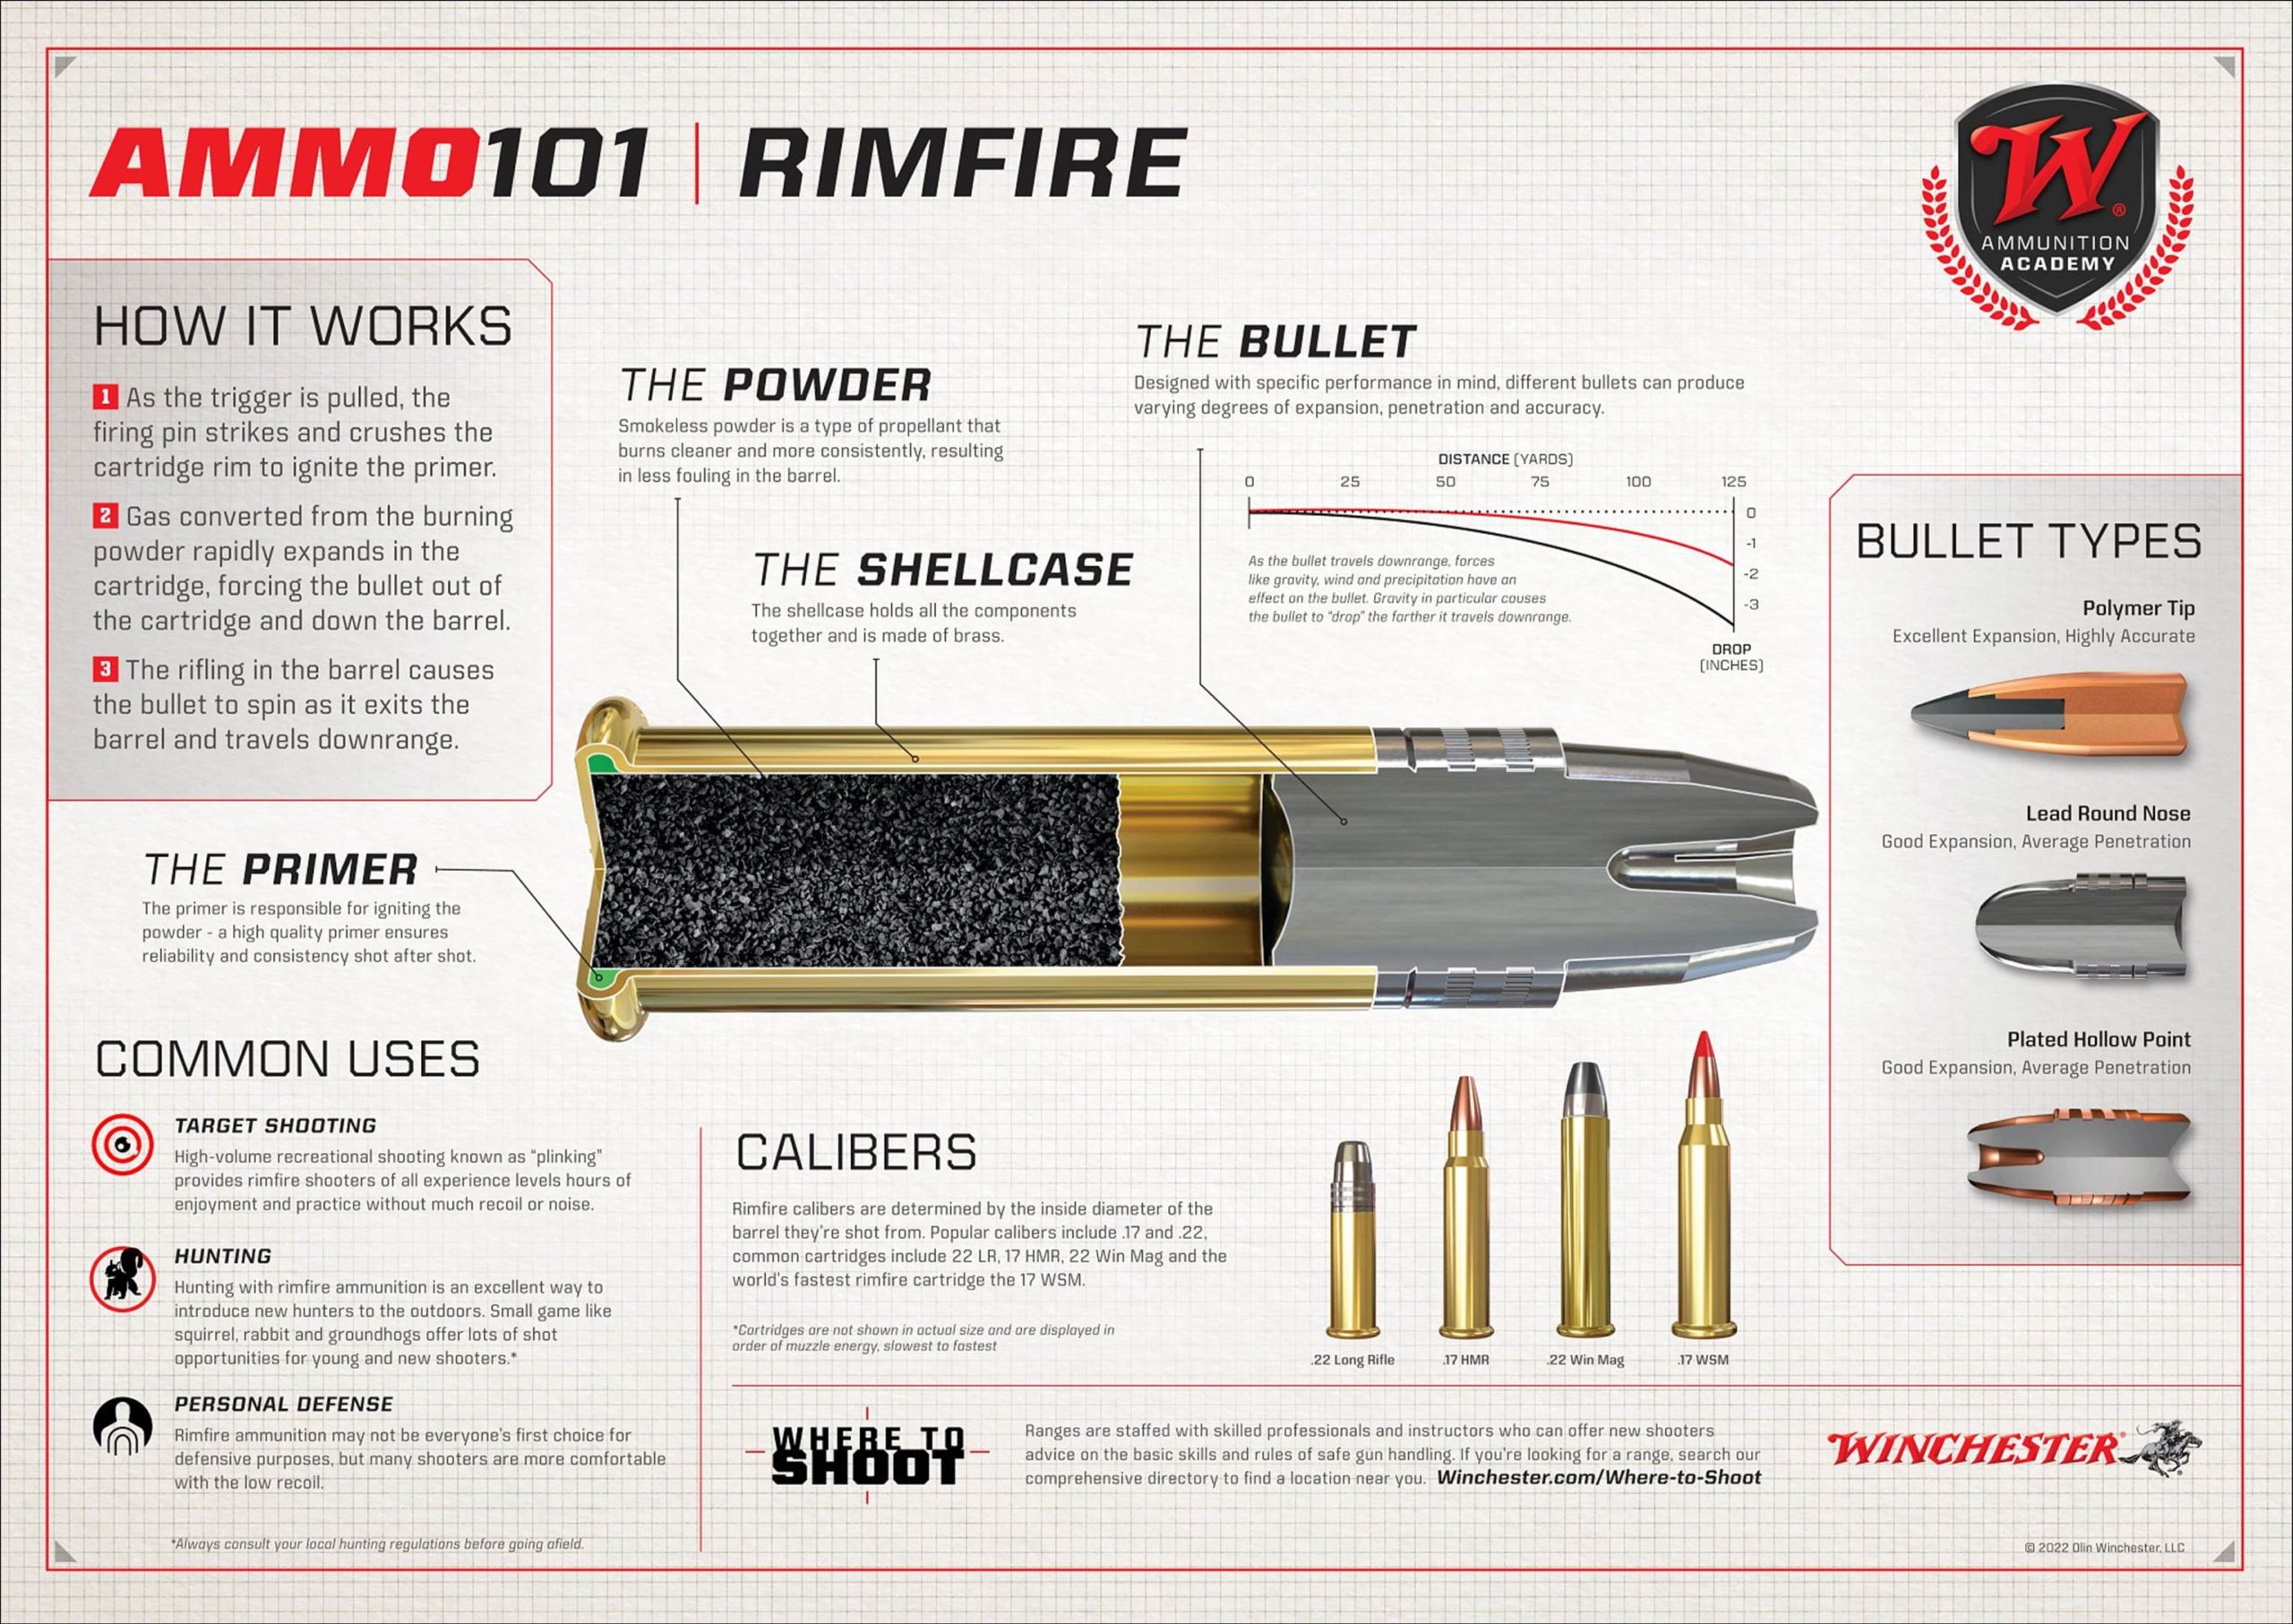 Image of the inner working of rimfire ammunition